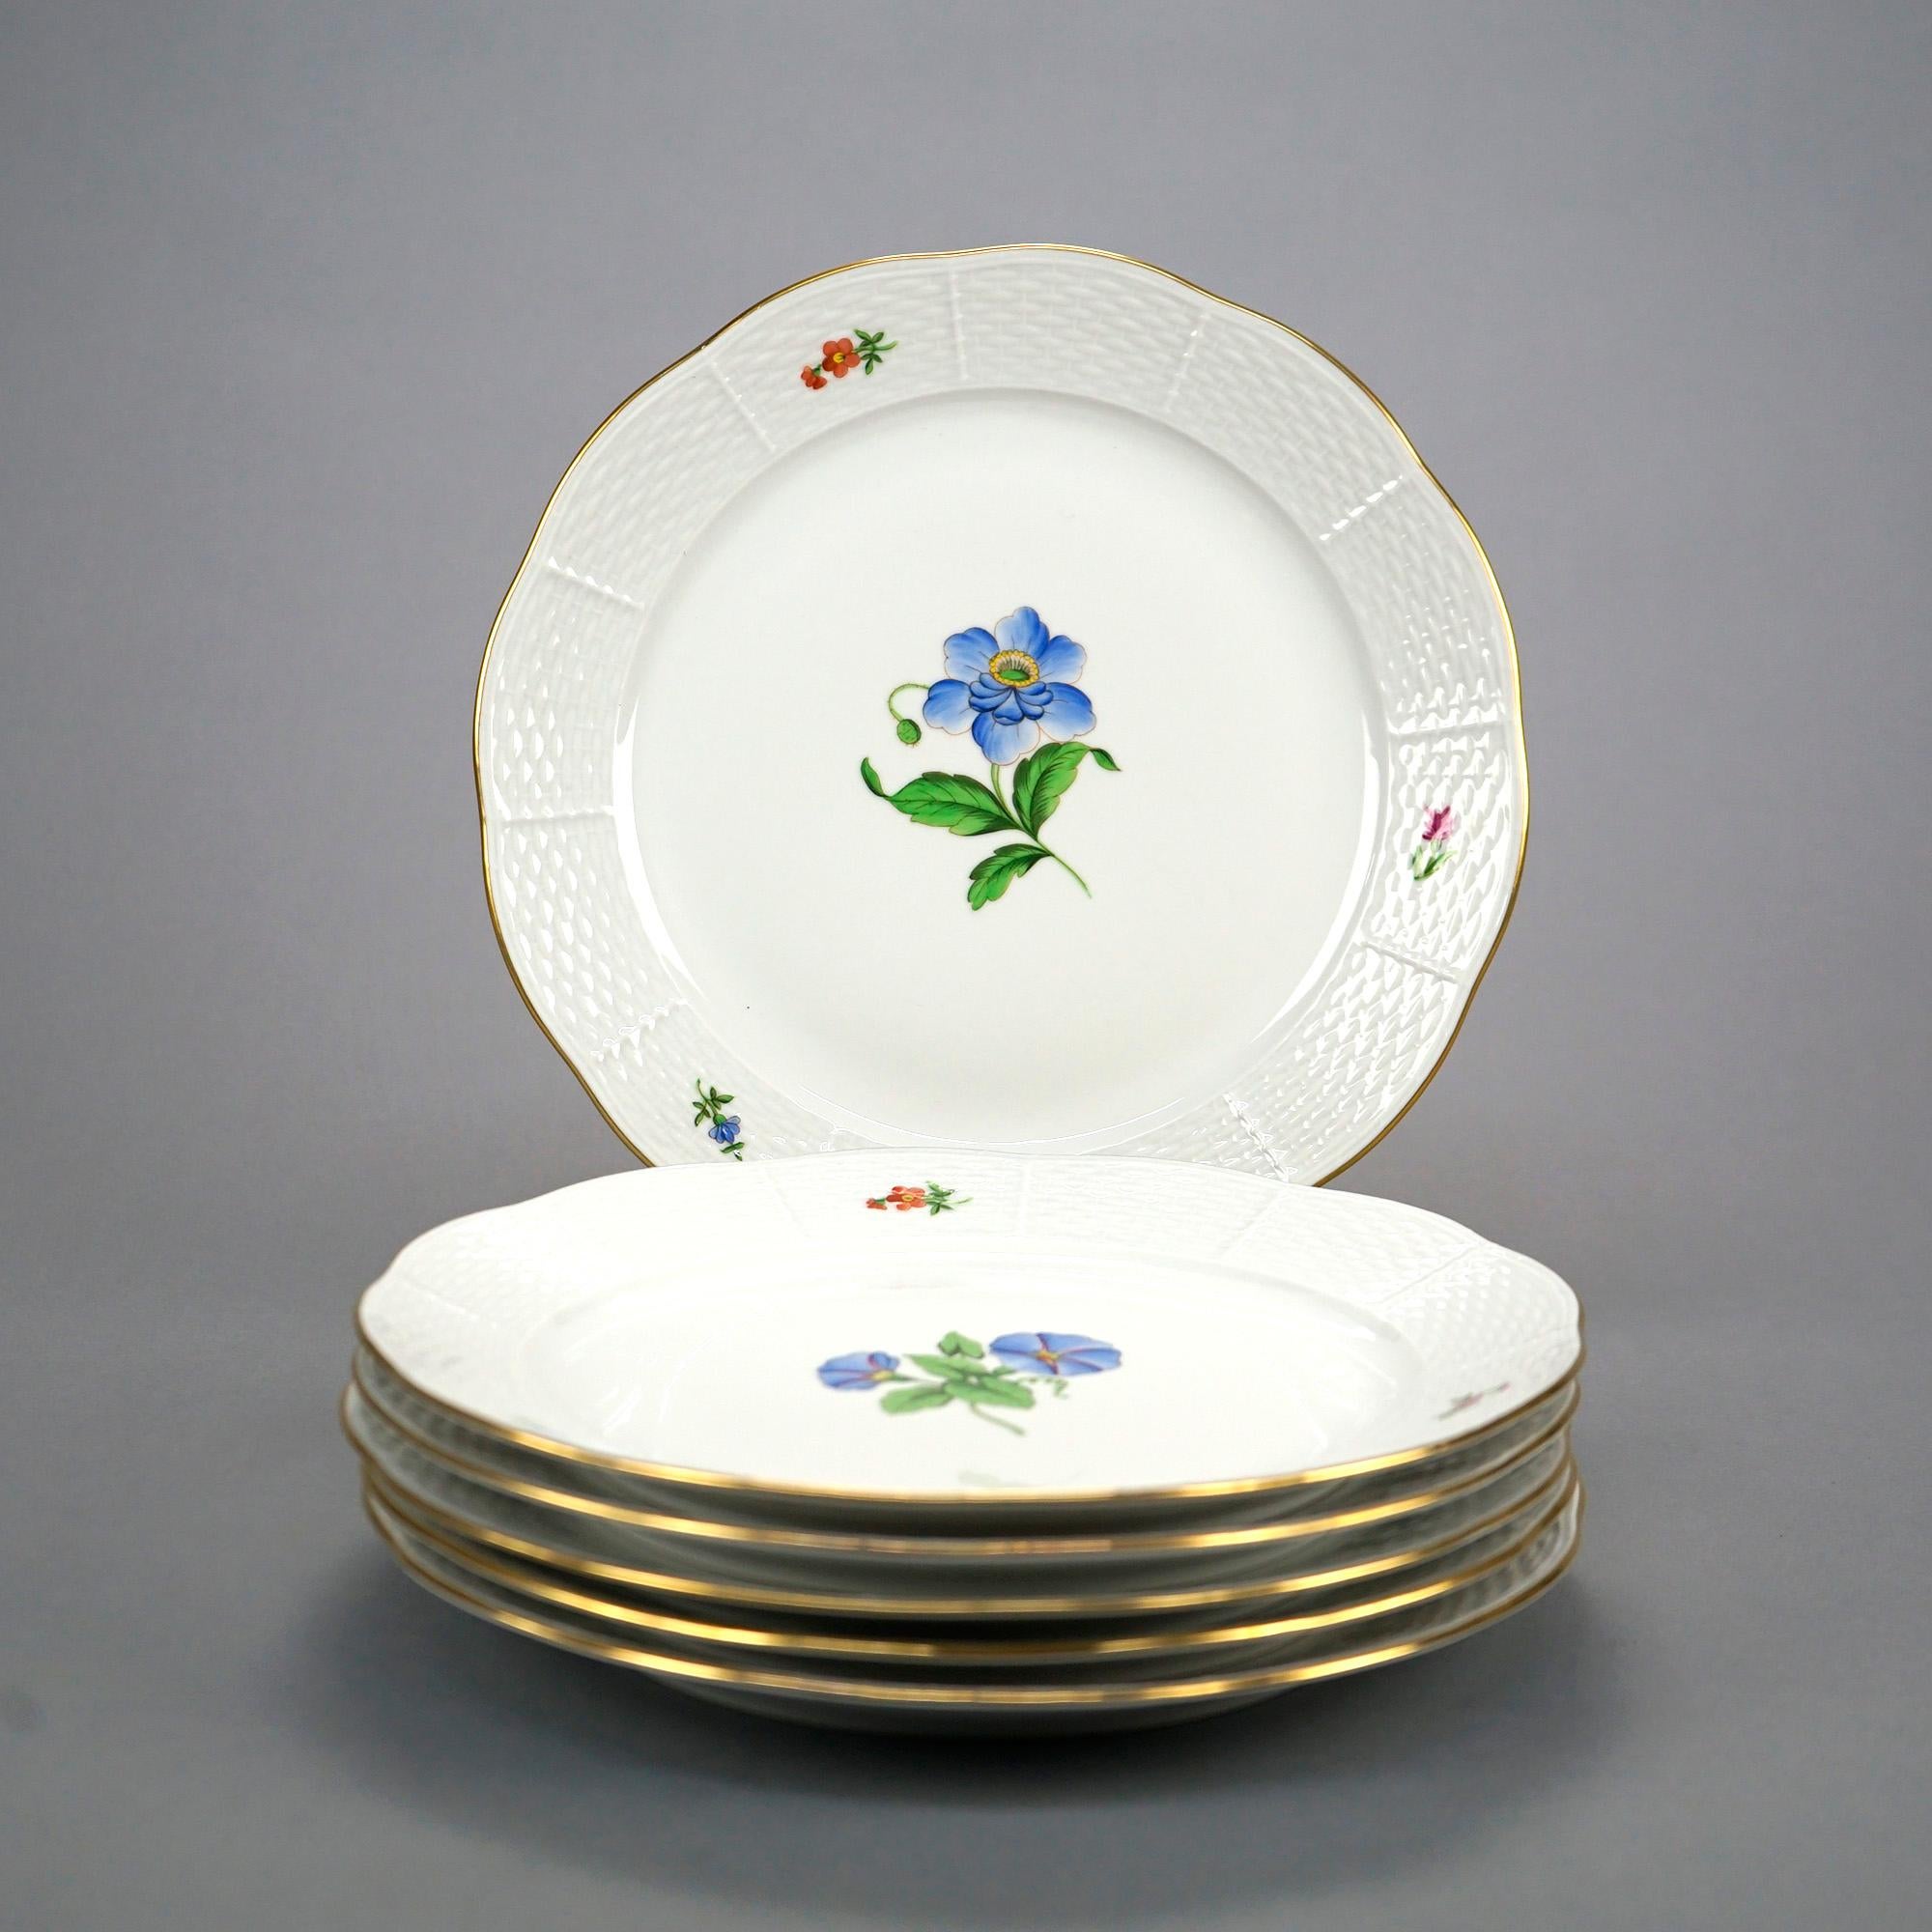 A set of six dinner plates by Herend offer fine china with floral decorated well and gilt rim, en verso maker mark as photographed, 20th century

Measures- 1''H x 10''W x 10''D.